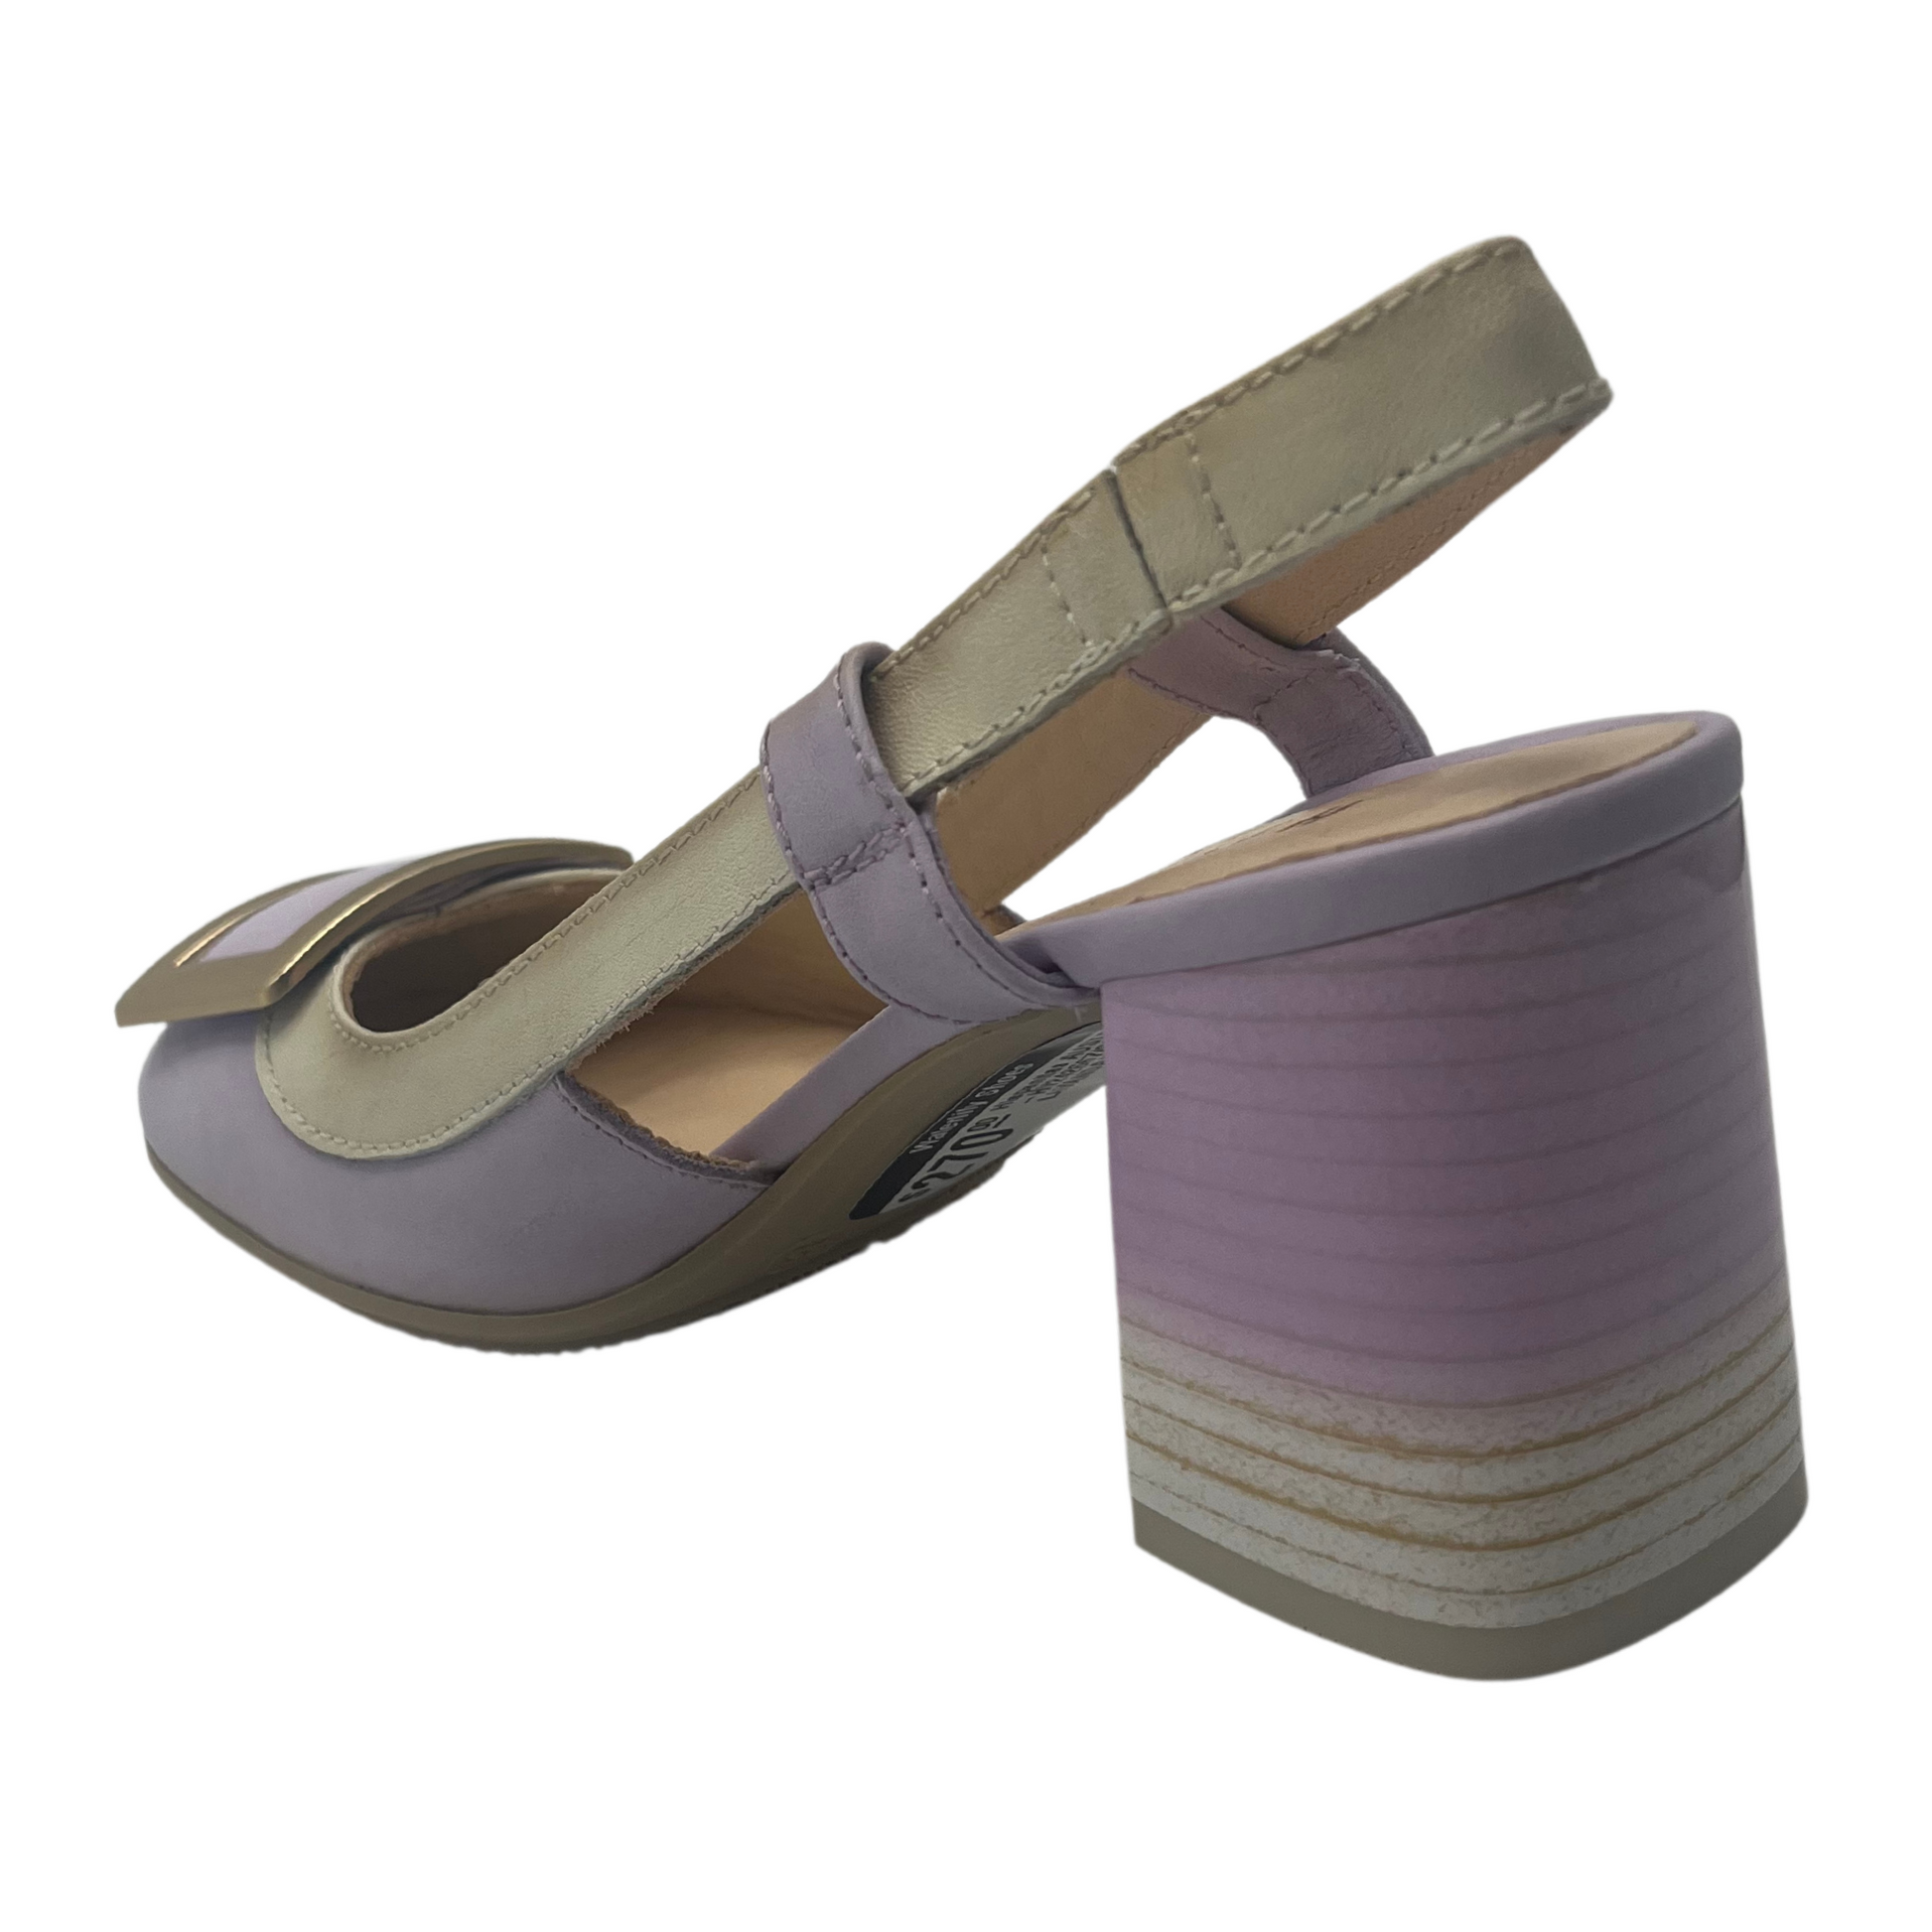 45 degree angled view of lavender pump from the back. 2.75 inch chunky heel and gold buckle detail on the toe box